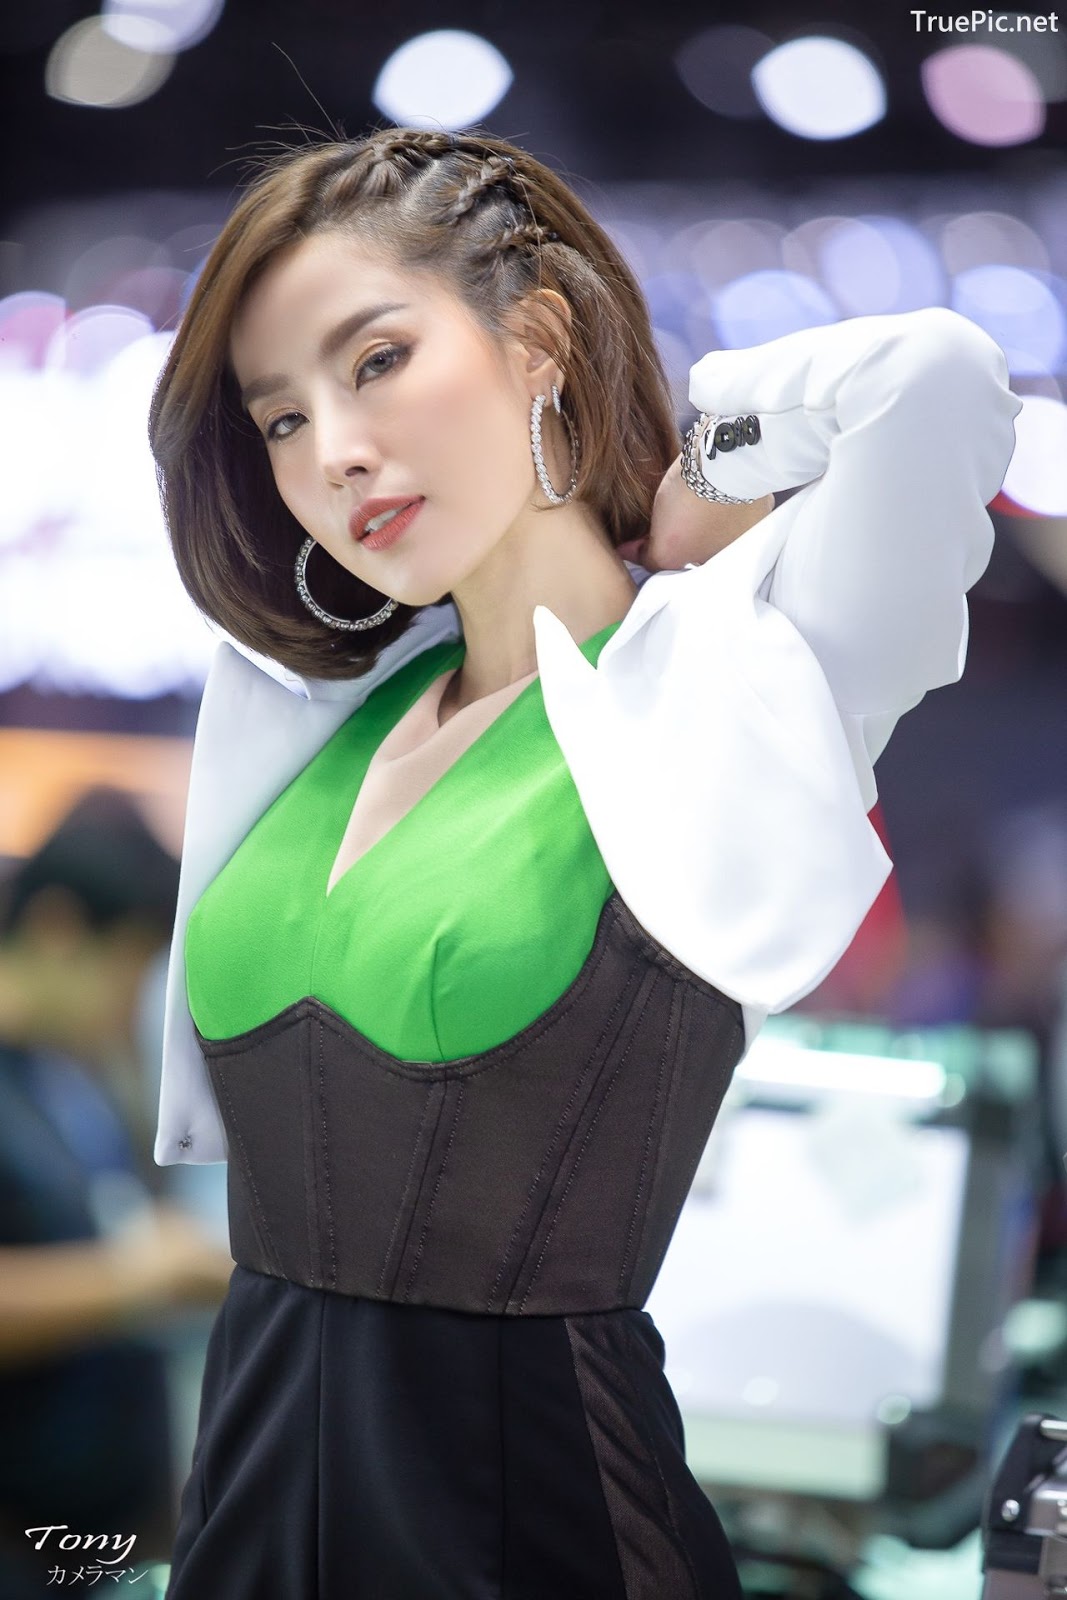 Image-Thailand-Hot-Model-Thai-Racing-Girl-At-Motor-Expo-2019-TruePic.net- Picture-28